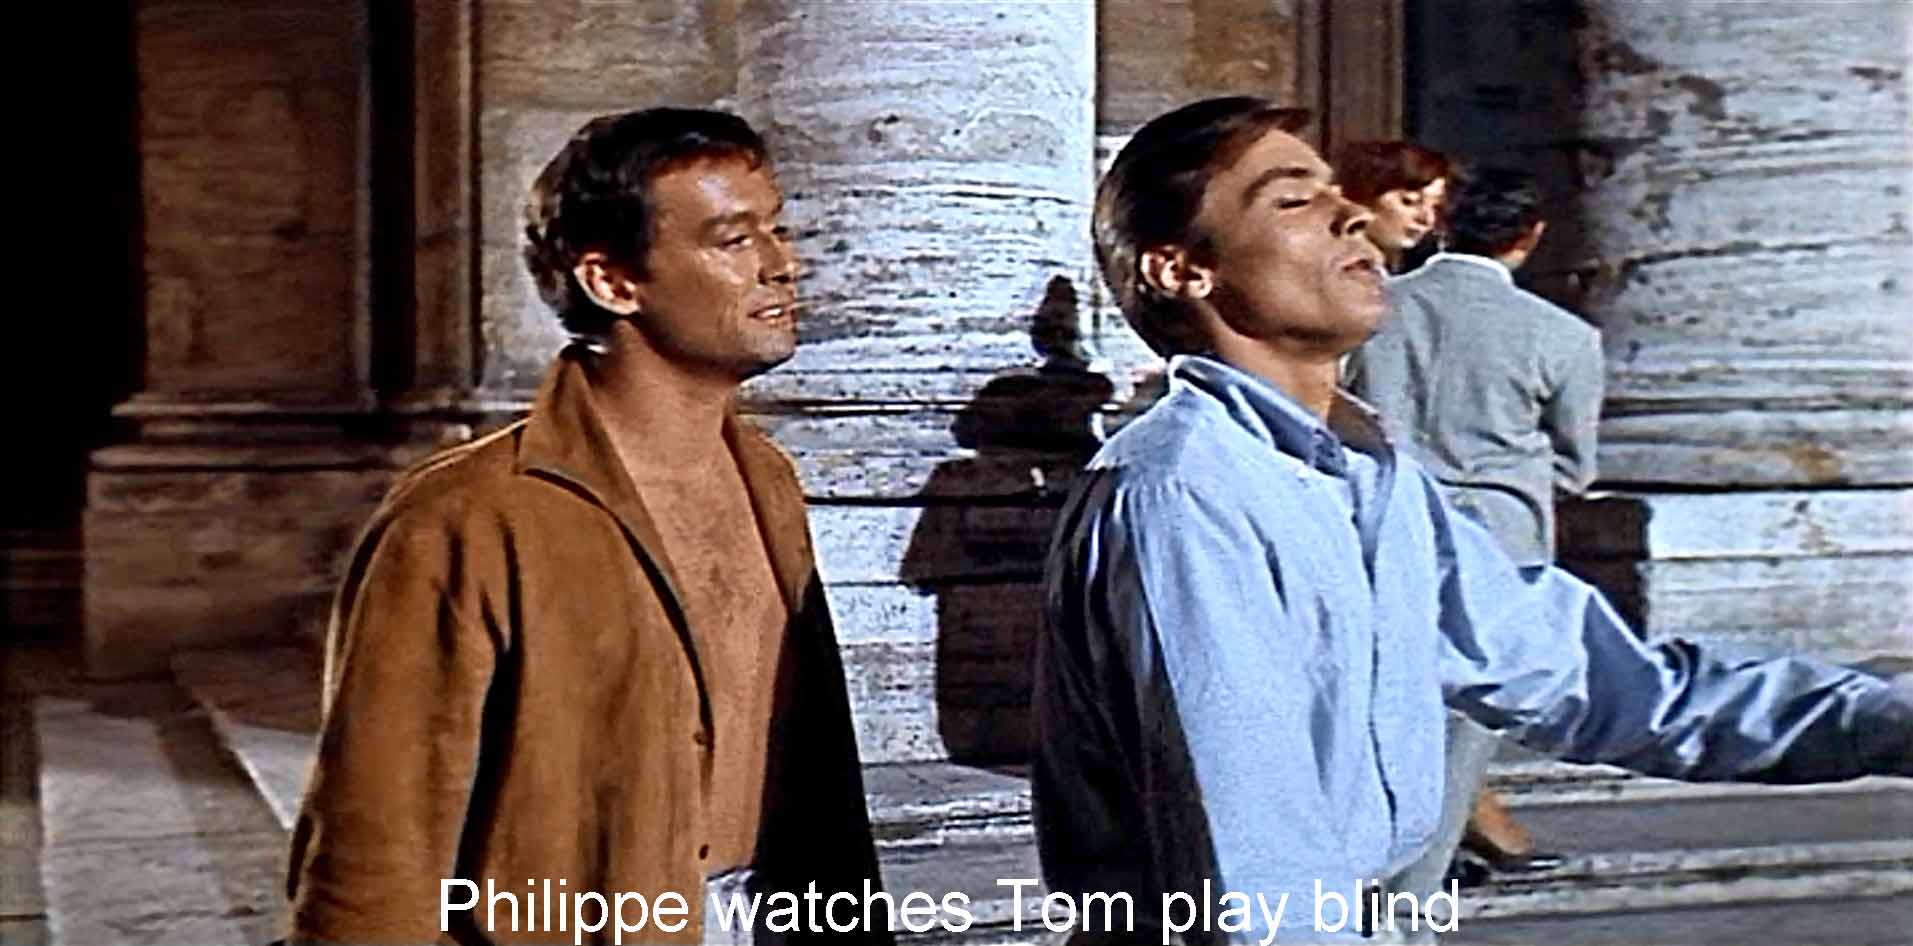 Philippe watches Tom play blind